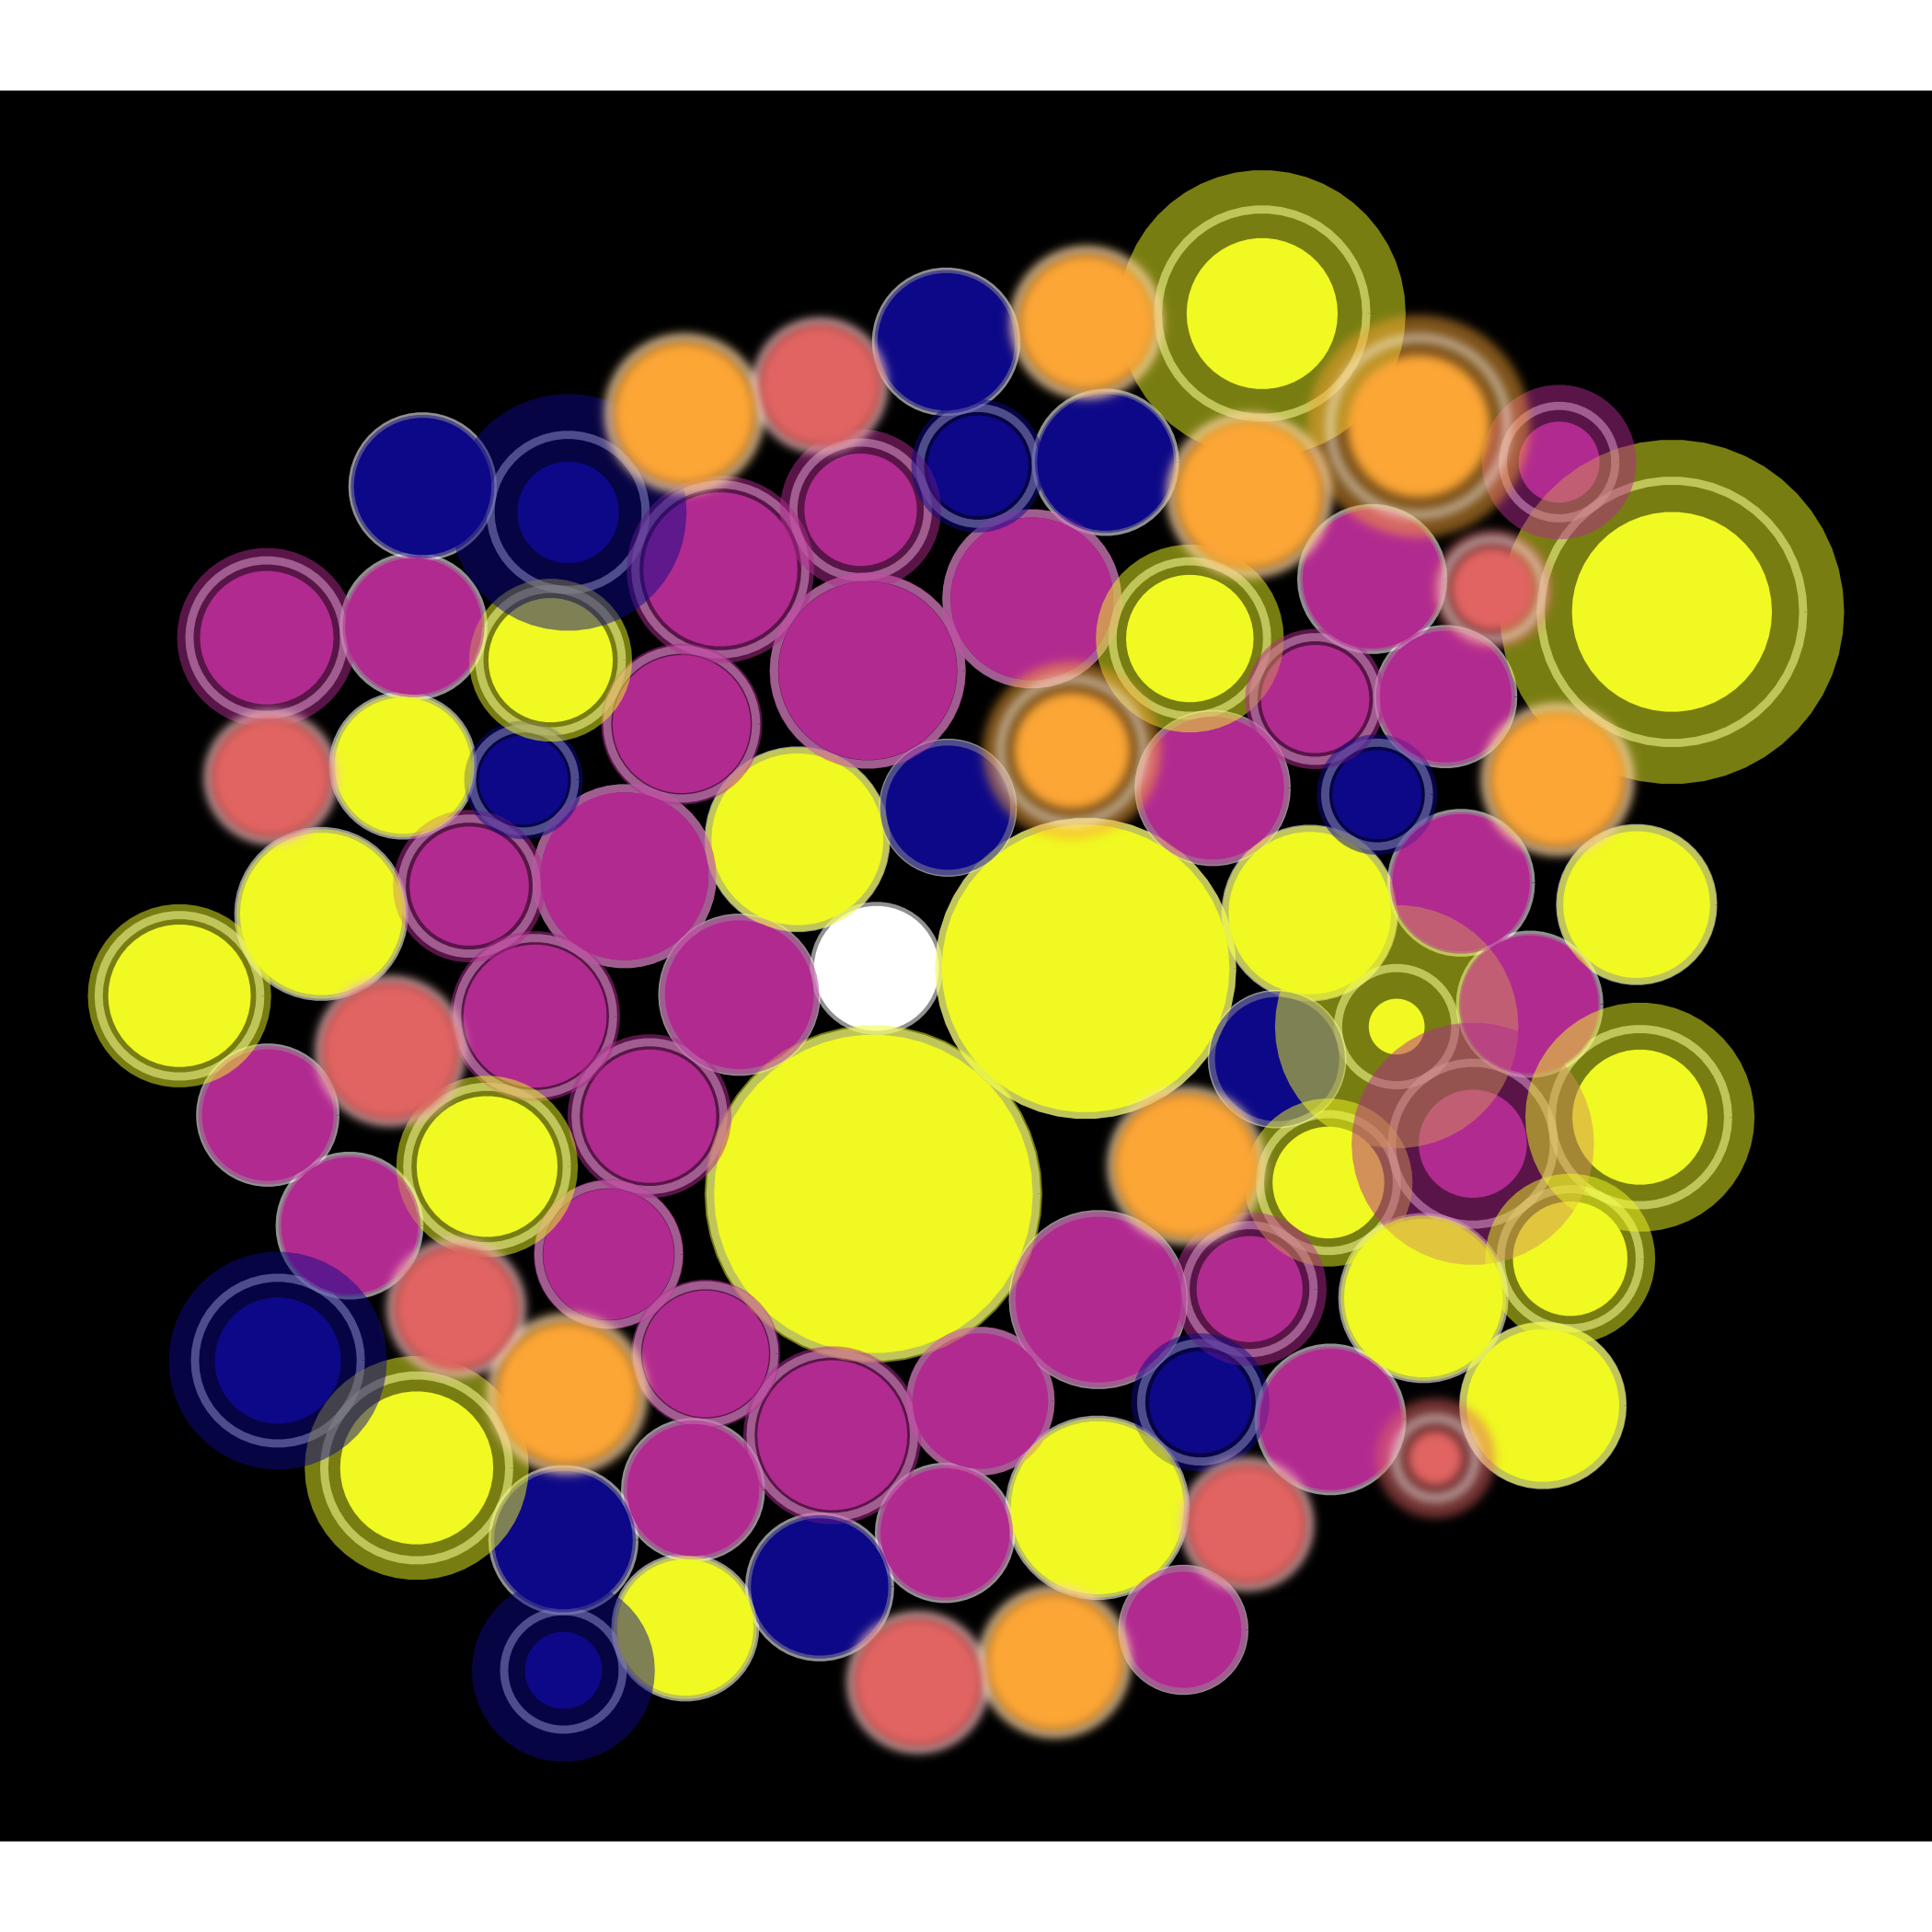 On a black background, 86 circles of different sizes and vibrant colors are packed together, including a small white circle in the middle, and larger yellow, magenta, and purple circles surroundig it; 17 circles are blurred.